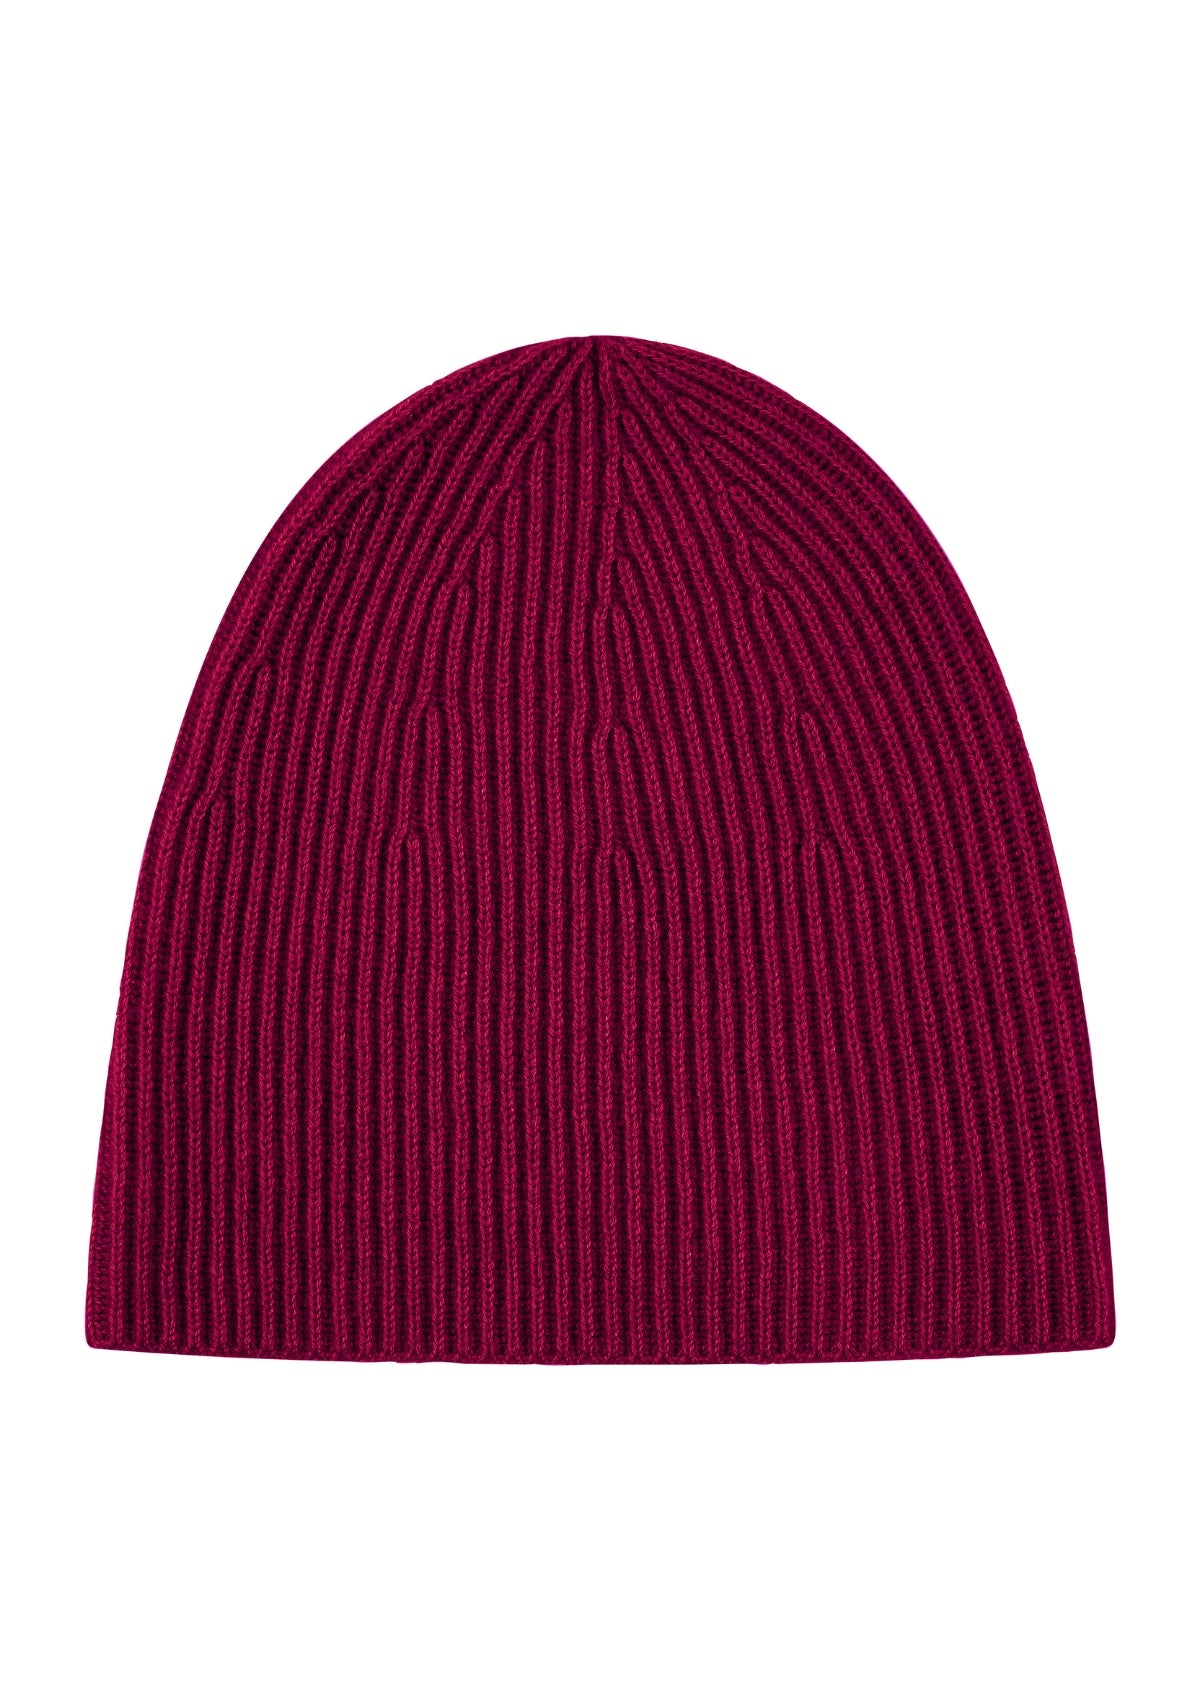 Cashmere Beanie in Barolo Red